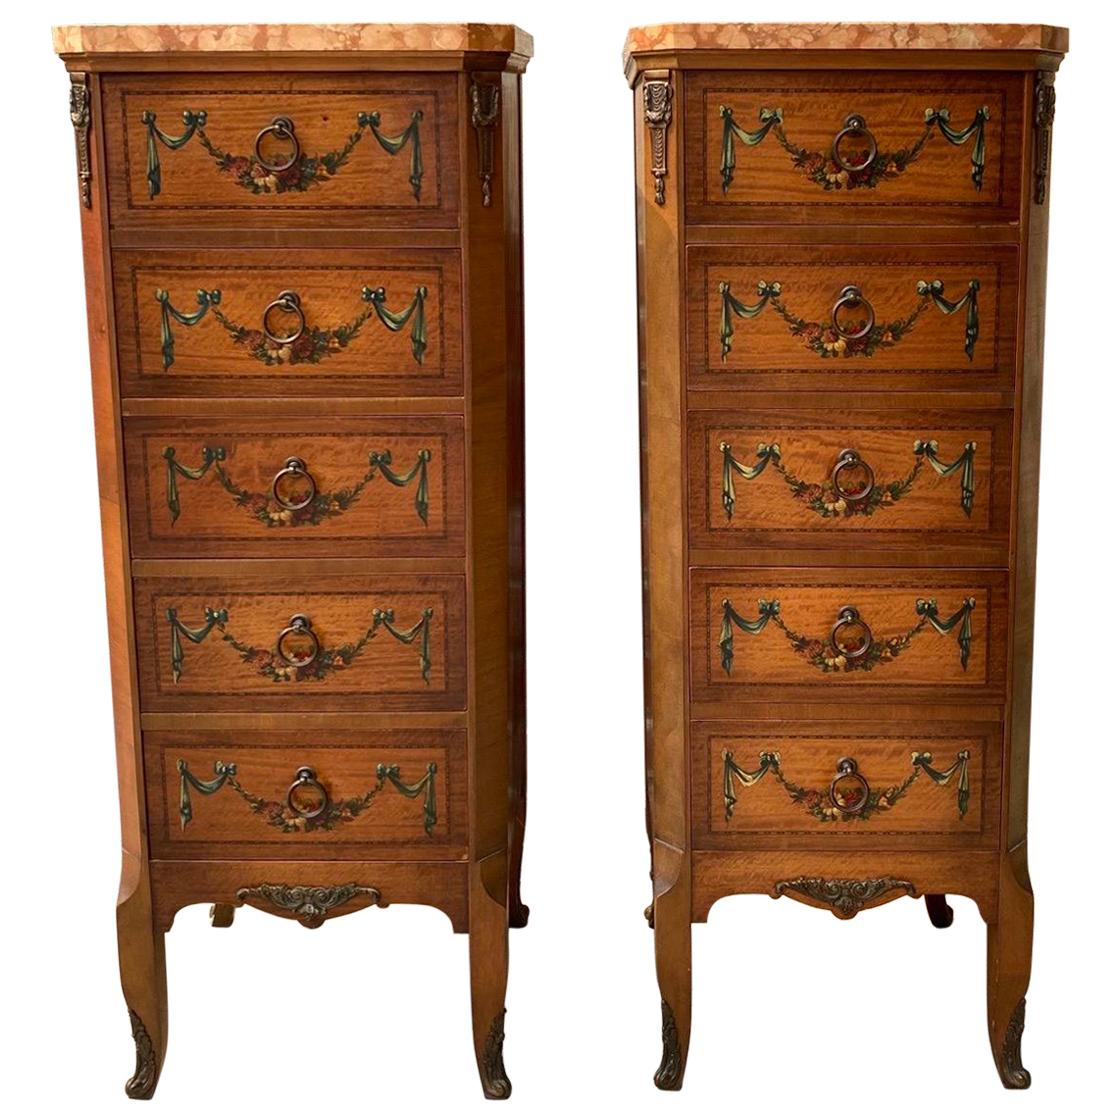 Pair of French Style Walnut and Marble Chest of Drawers, circa 1927